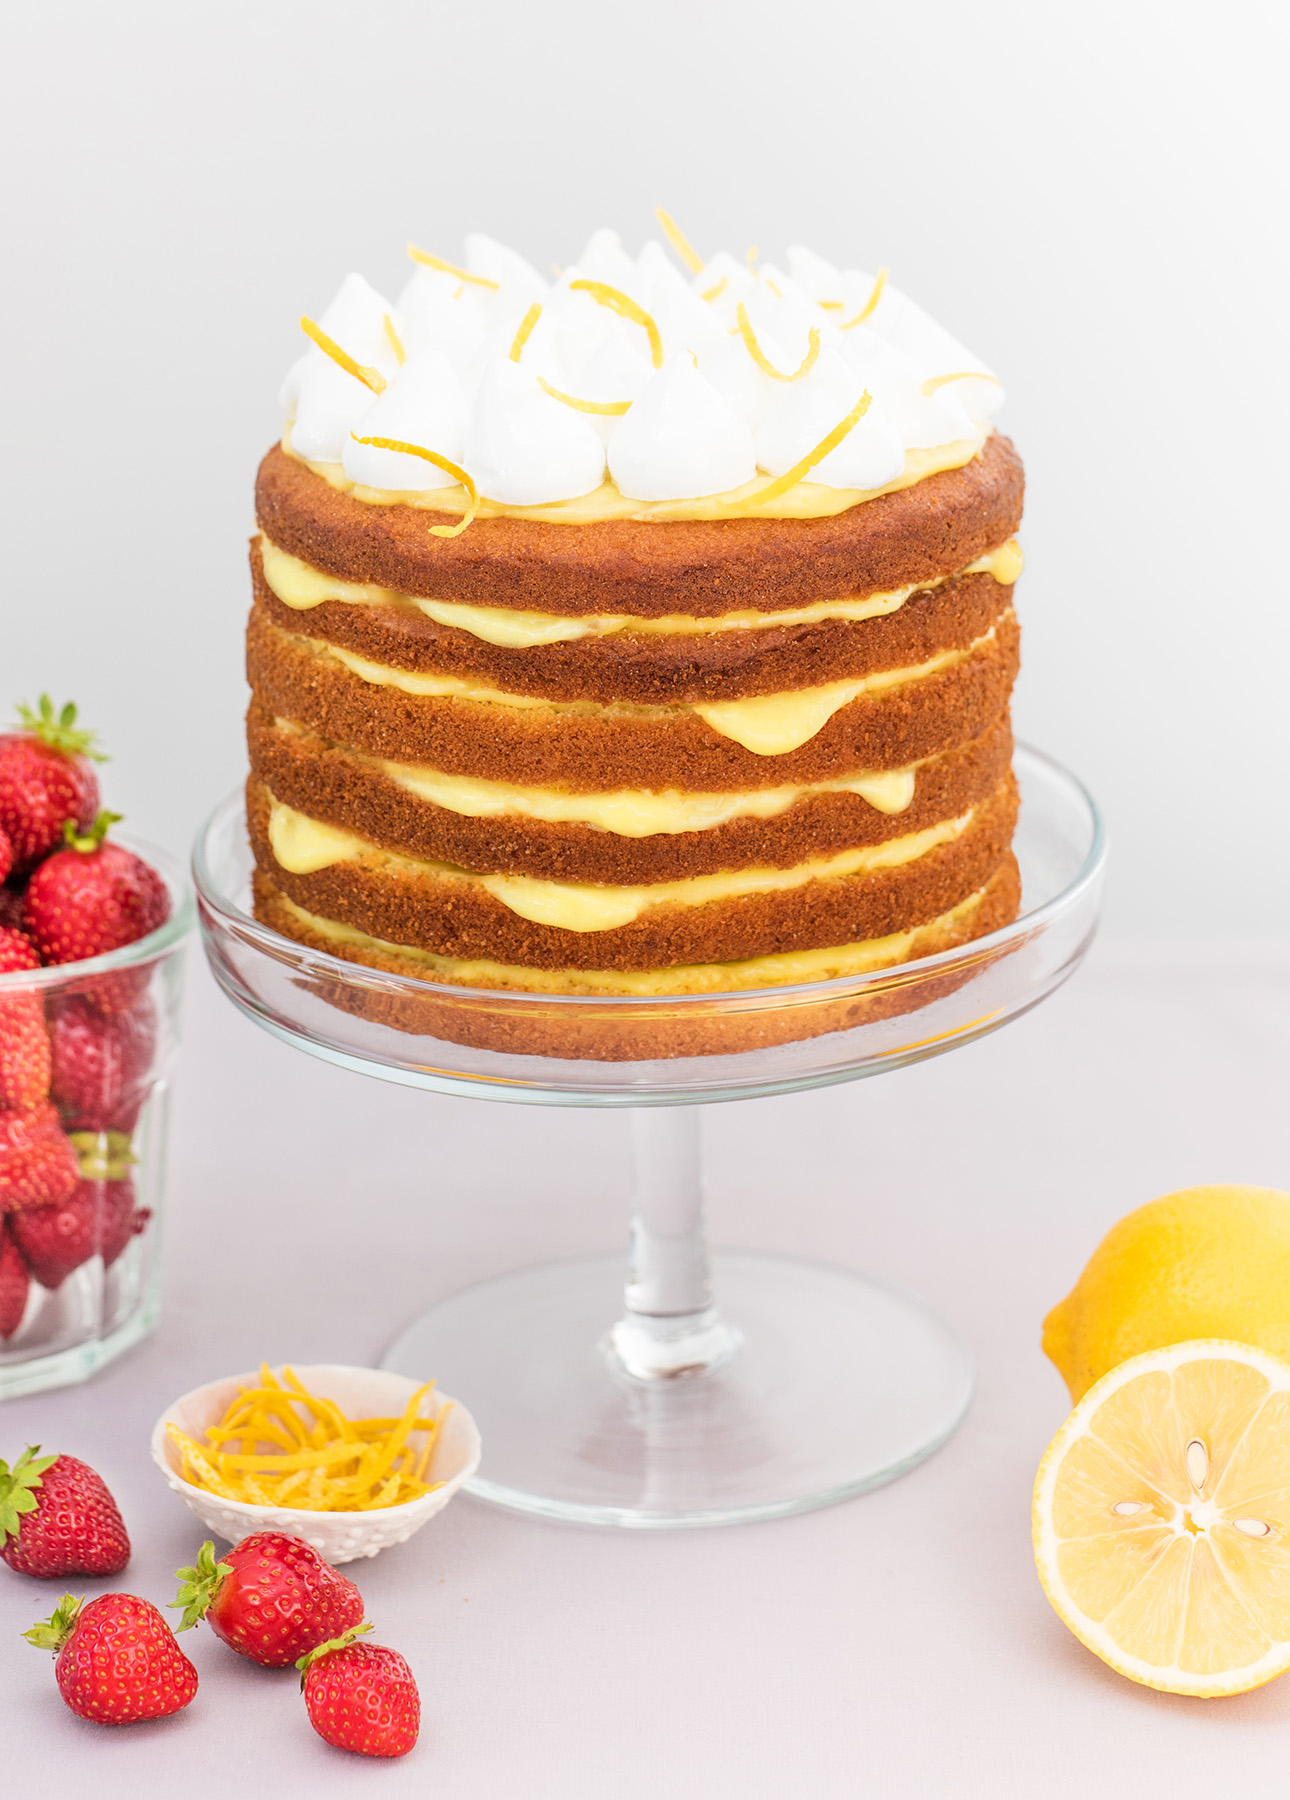 Layered cake with lemon curd as a filling // FoodNouveau.com